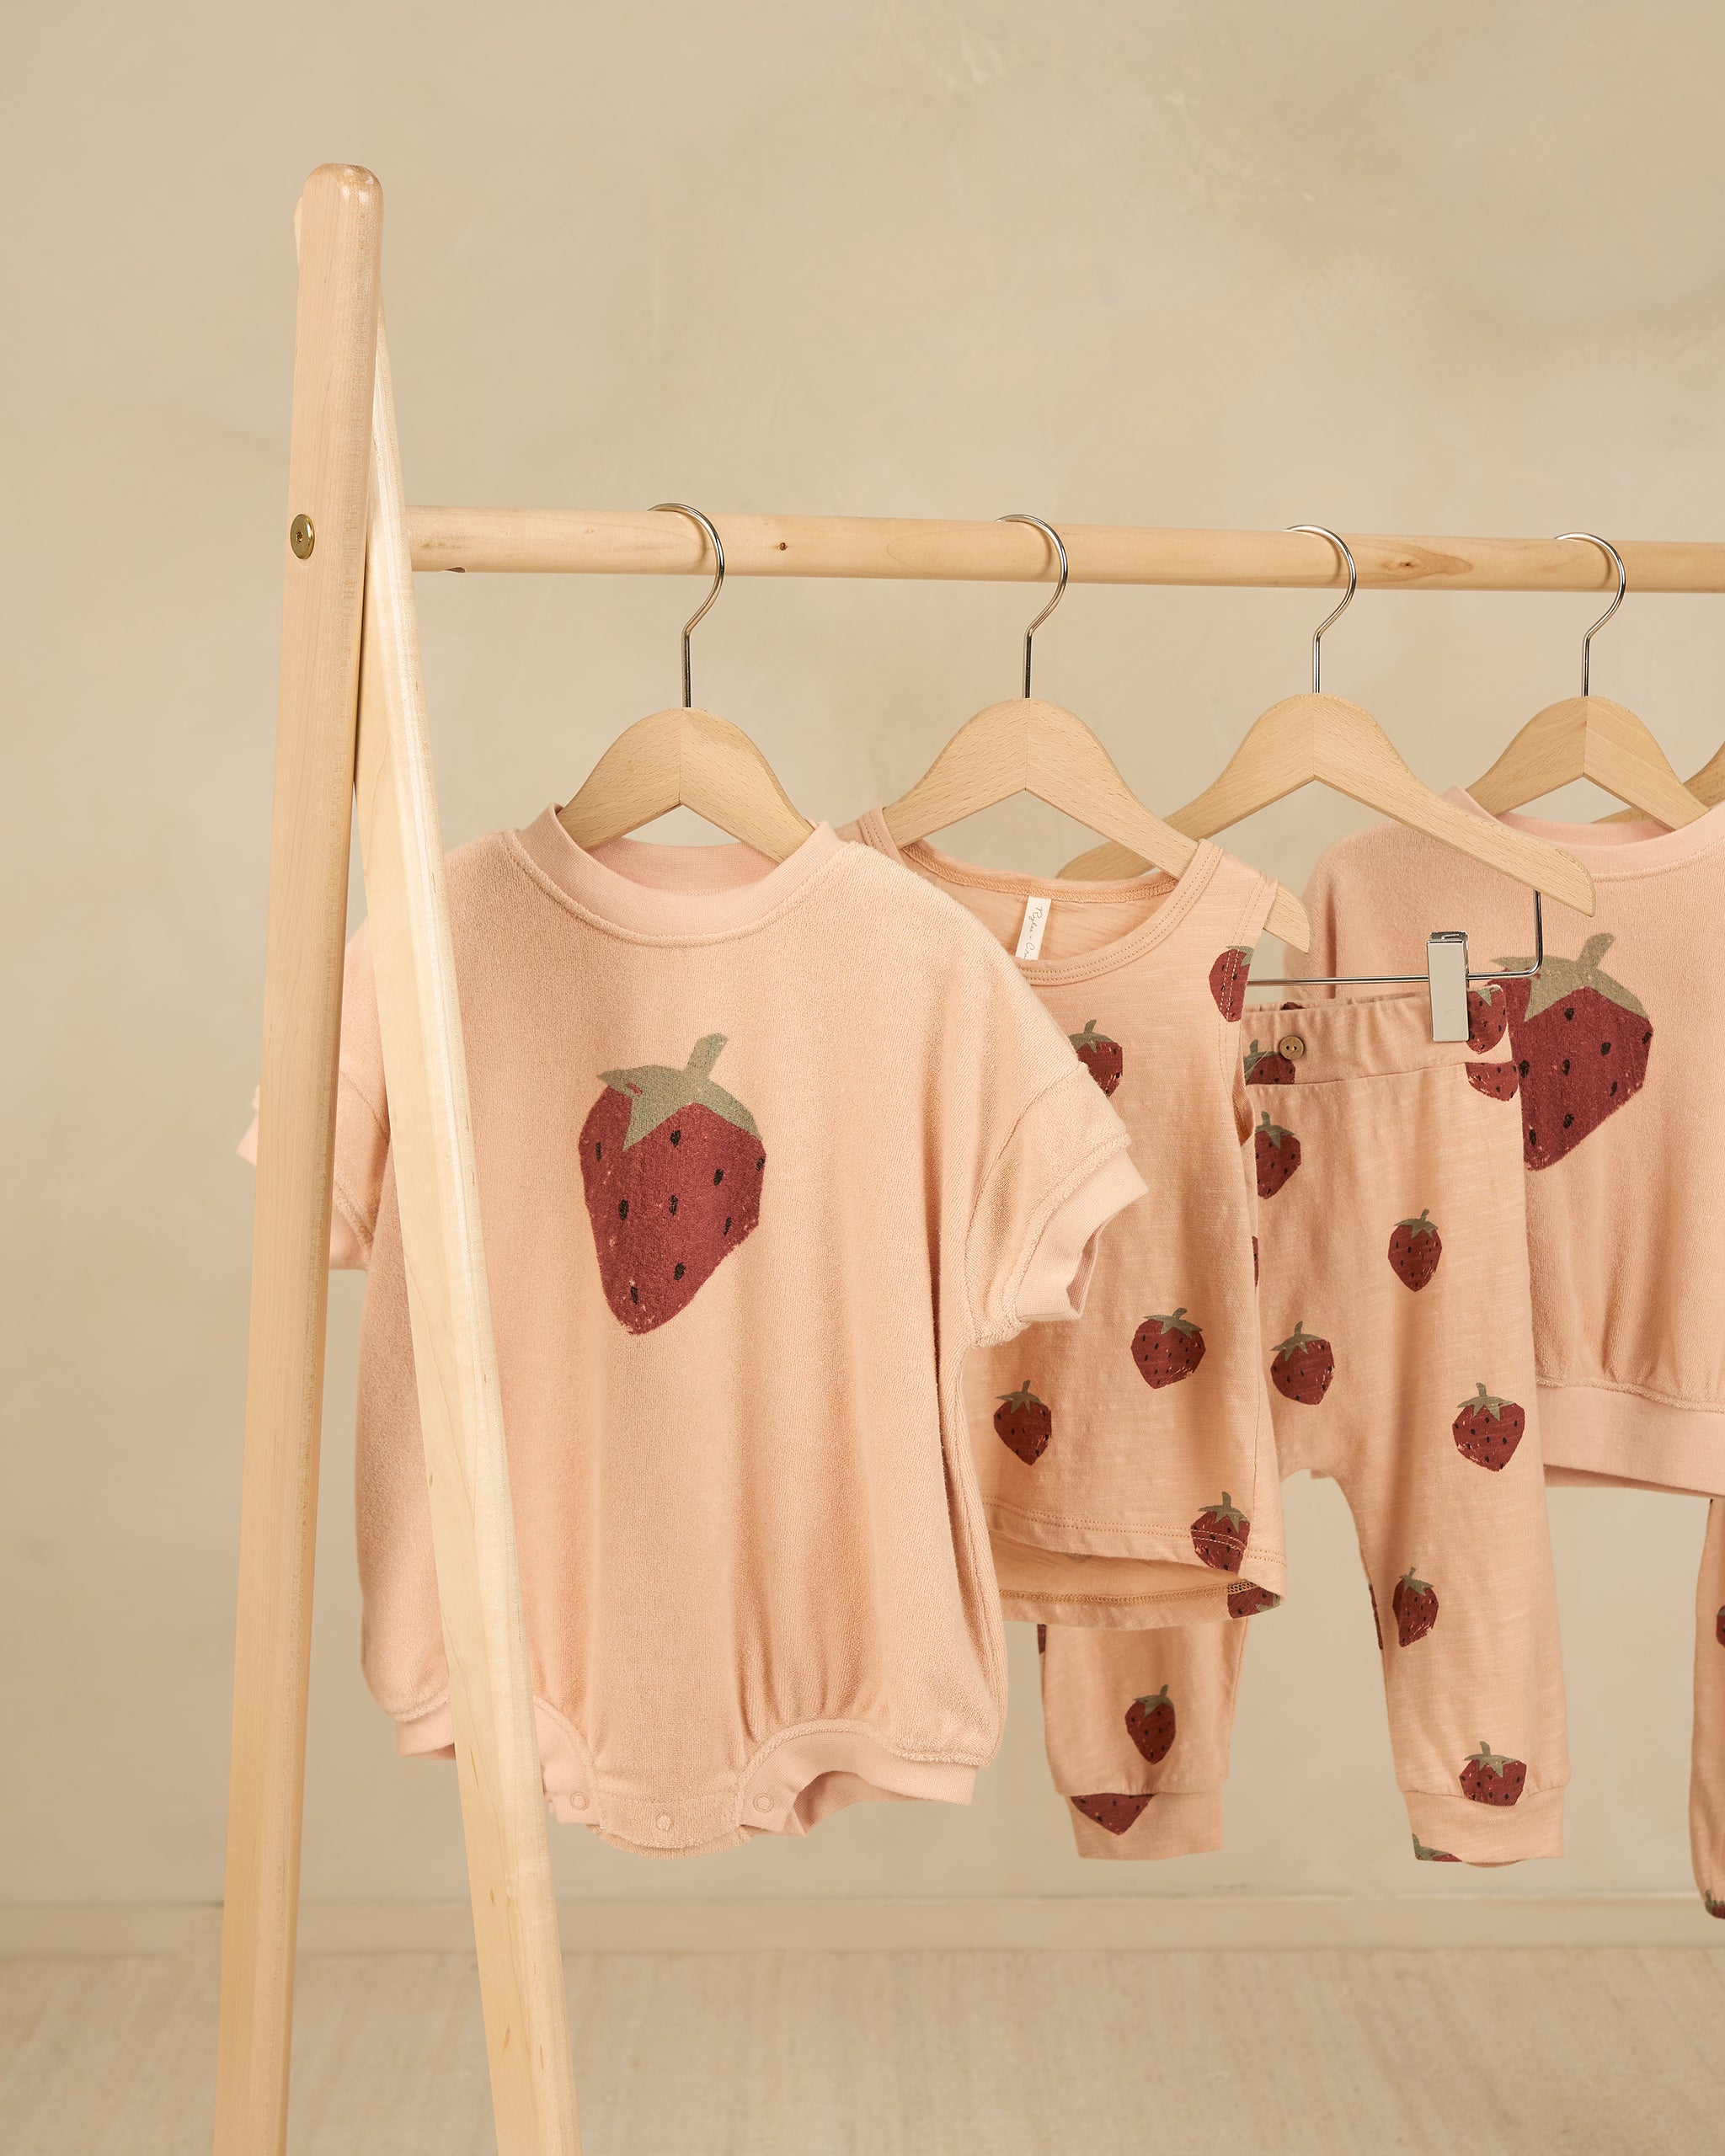 Noah Romper || Strawberry - Rylee + Cru | Kids Clothes | Trendy Baby Clothes | Modern Infant Outfits |